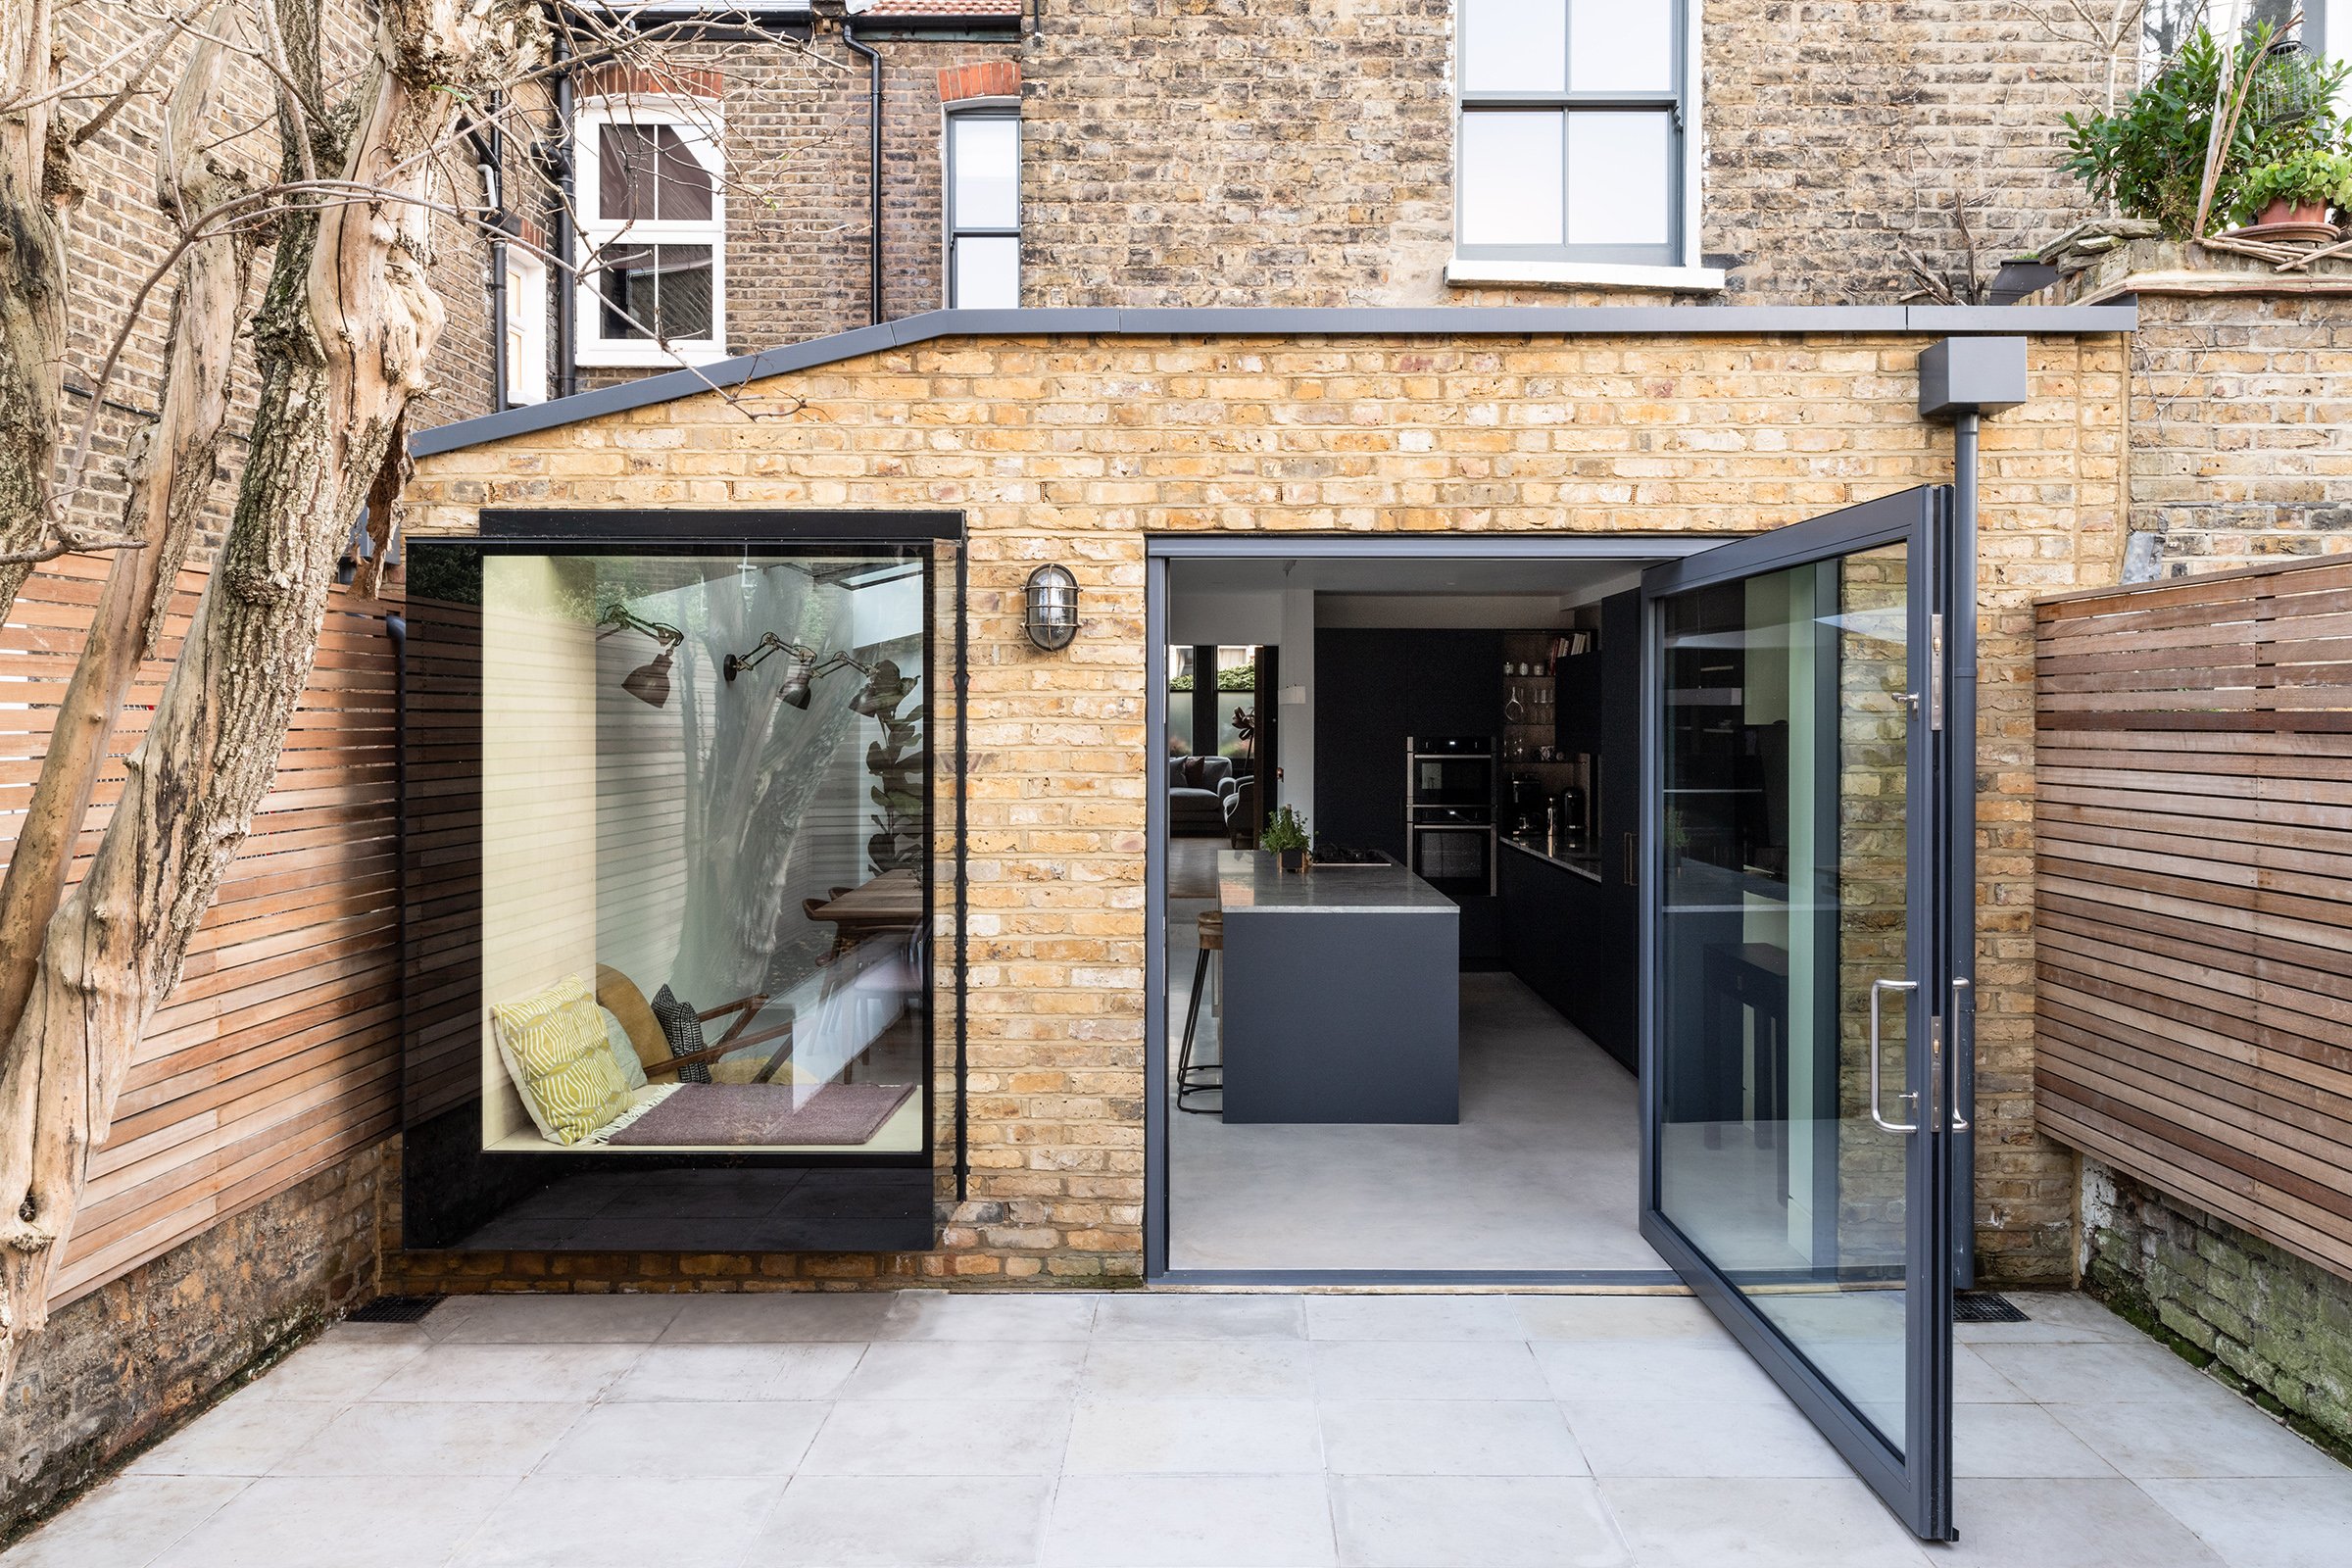 10-mcdowall-road-victorian-house-extension-interior-design-architecture-london-uk-rider-stirland-architects.jpg